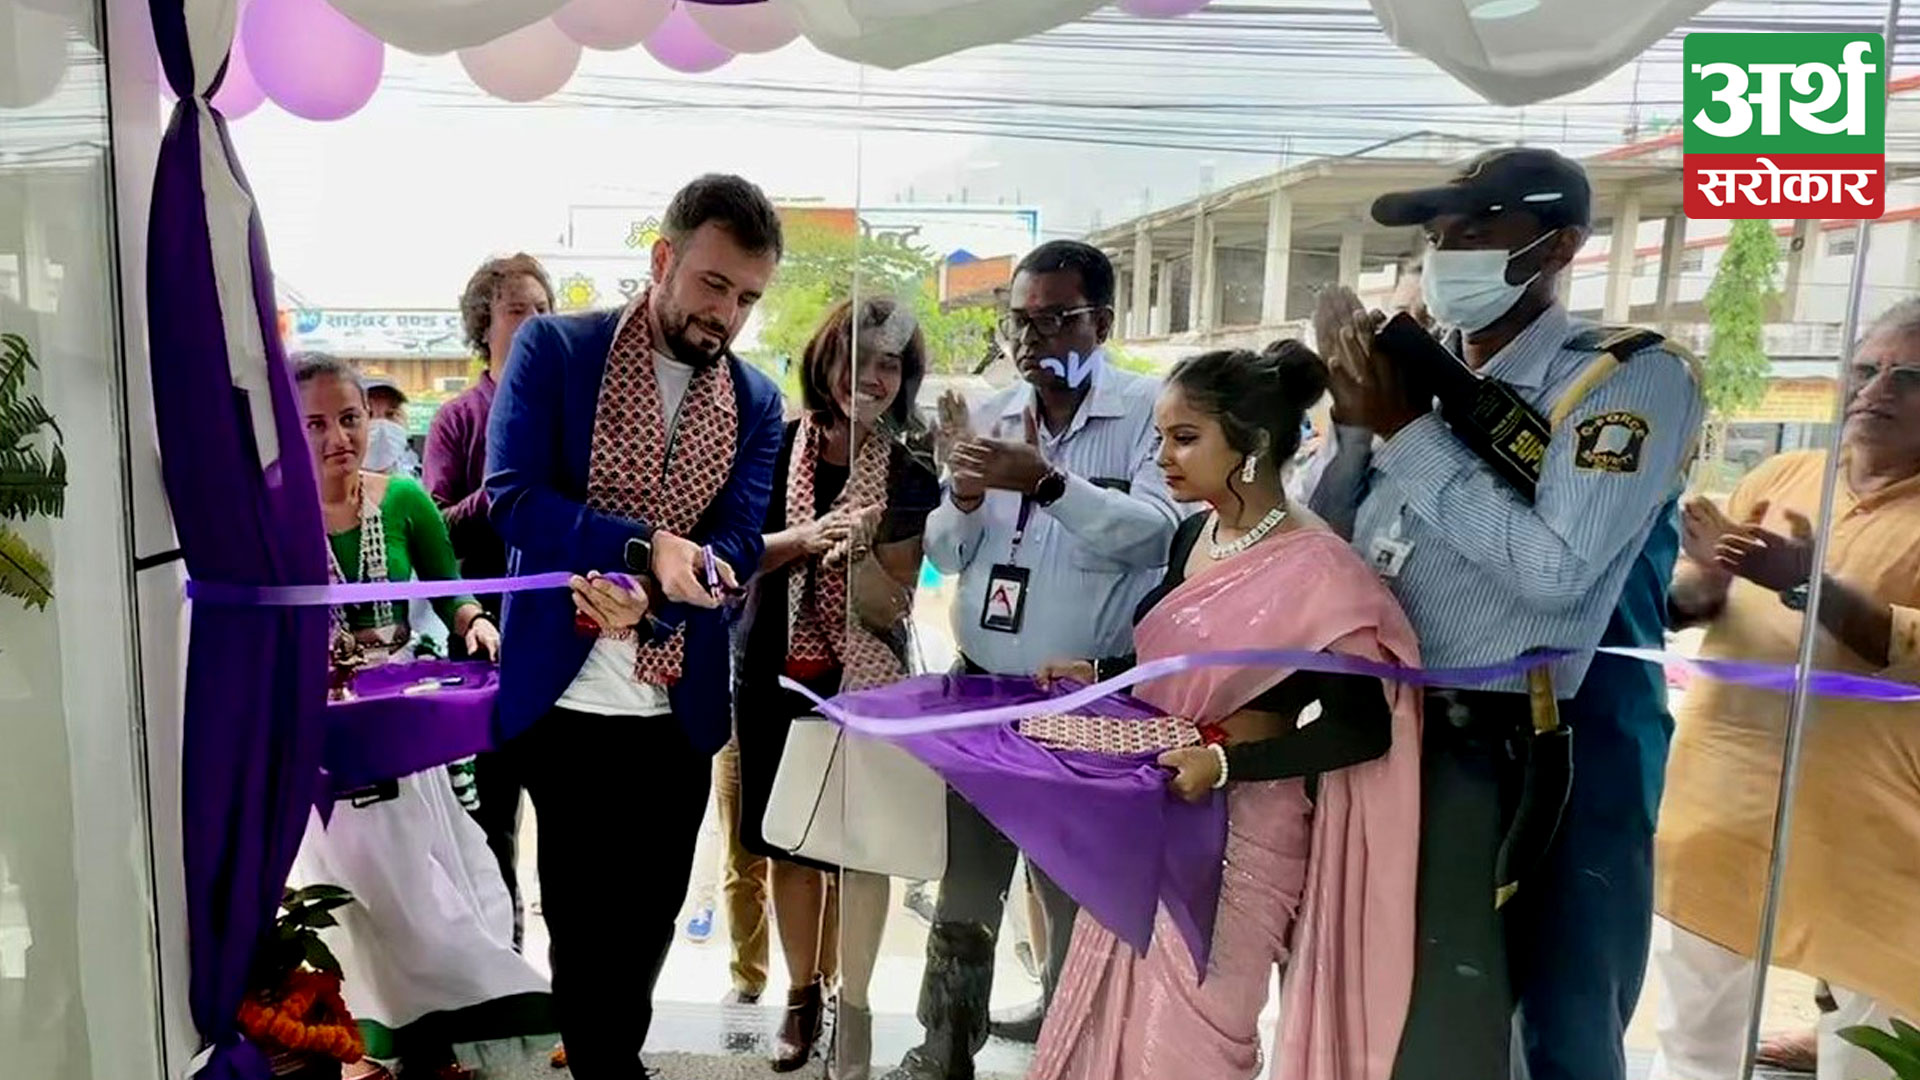 Ncell’s new Ncell Centre in Lahan, inaugurated by Jabbor Kayumov